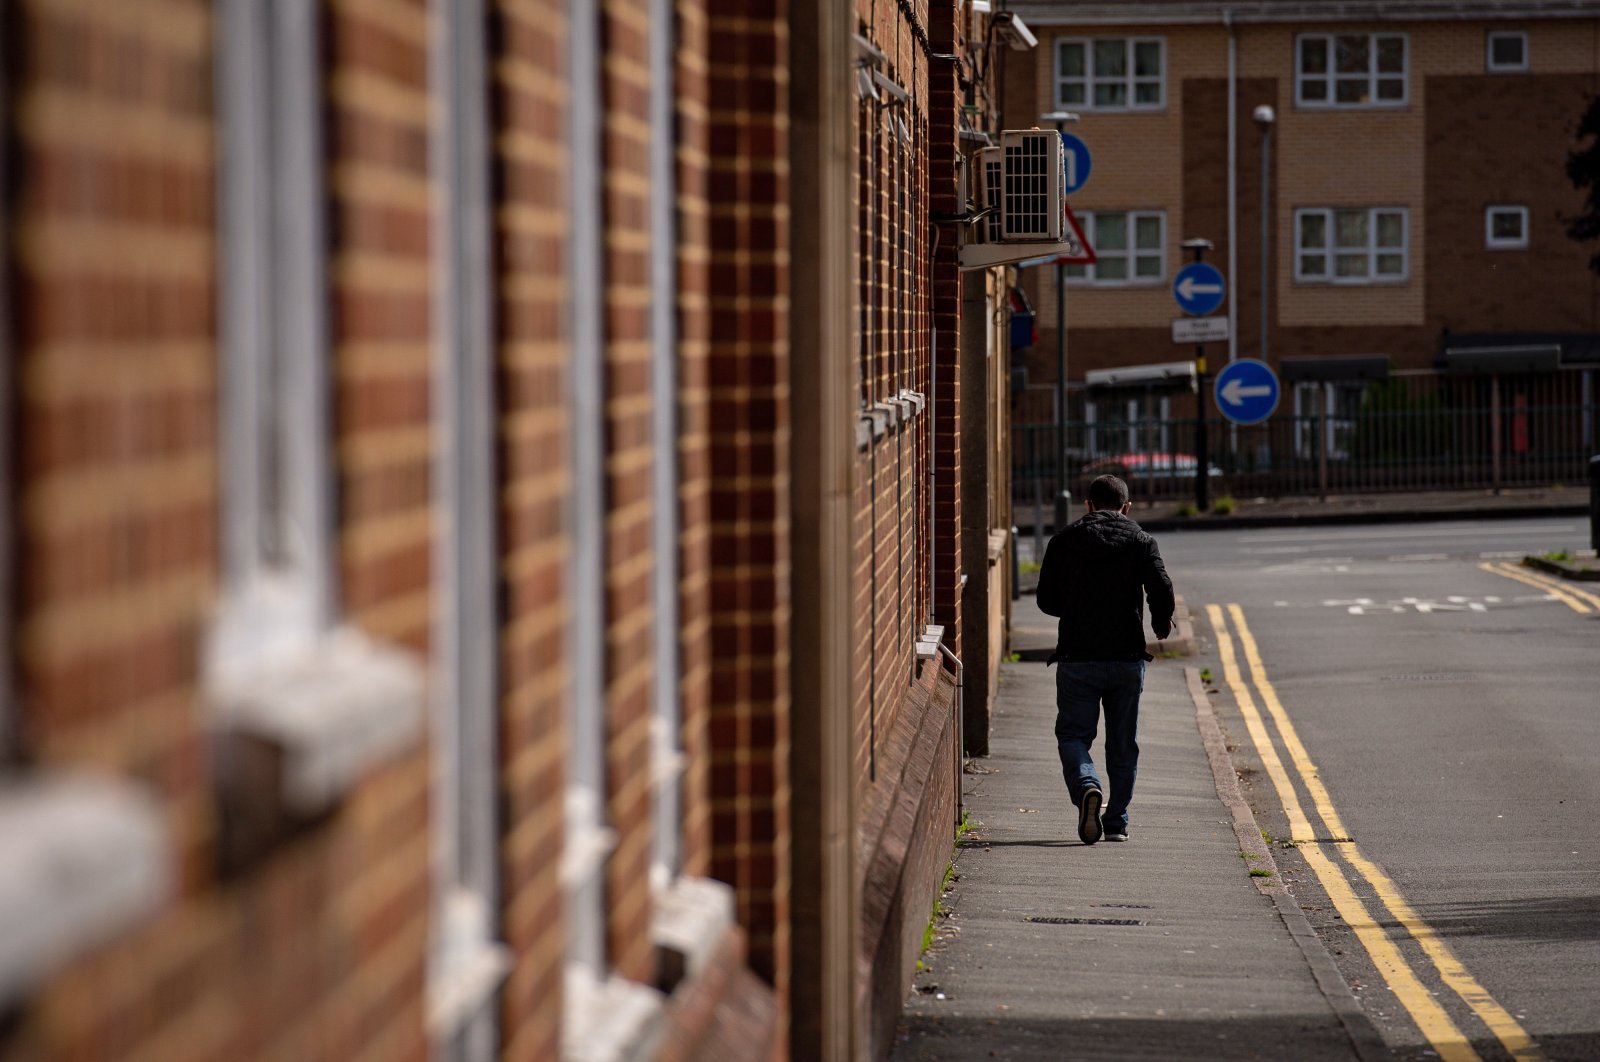 A man walks past The Stone Road hostel in Edgbaston, which has been closed following an outbreak of the coronavirus, Birmingham, Sept. 5, 2020. (Reuters Photo)